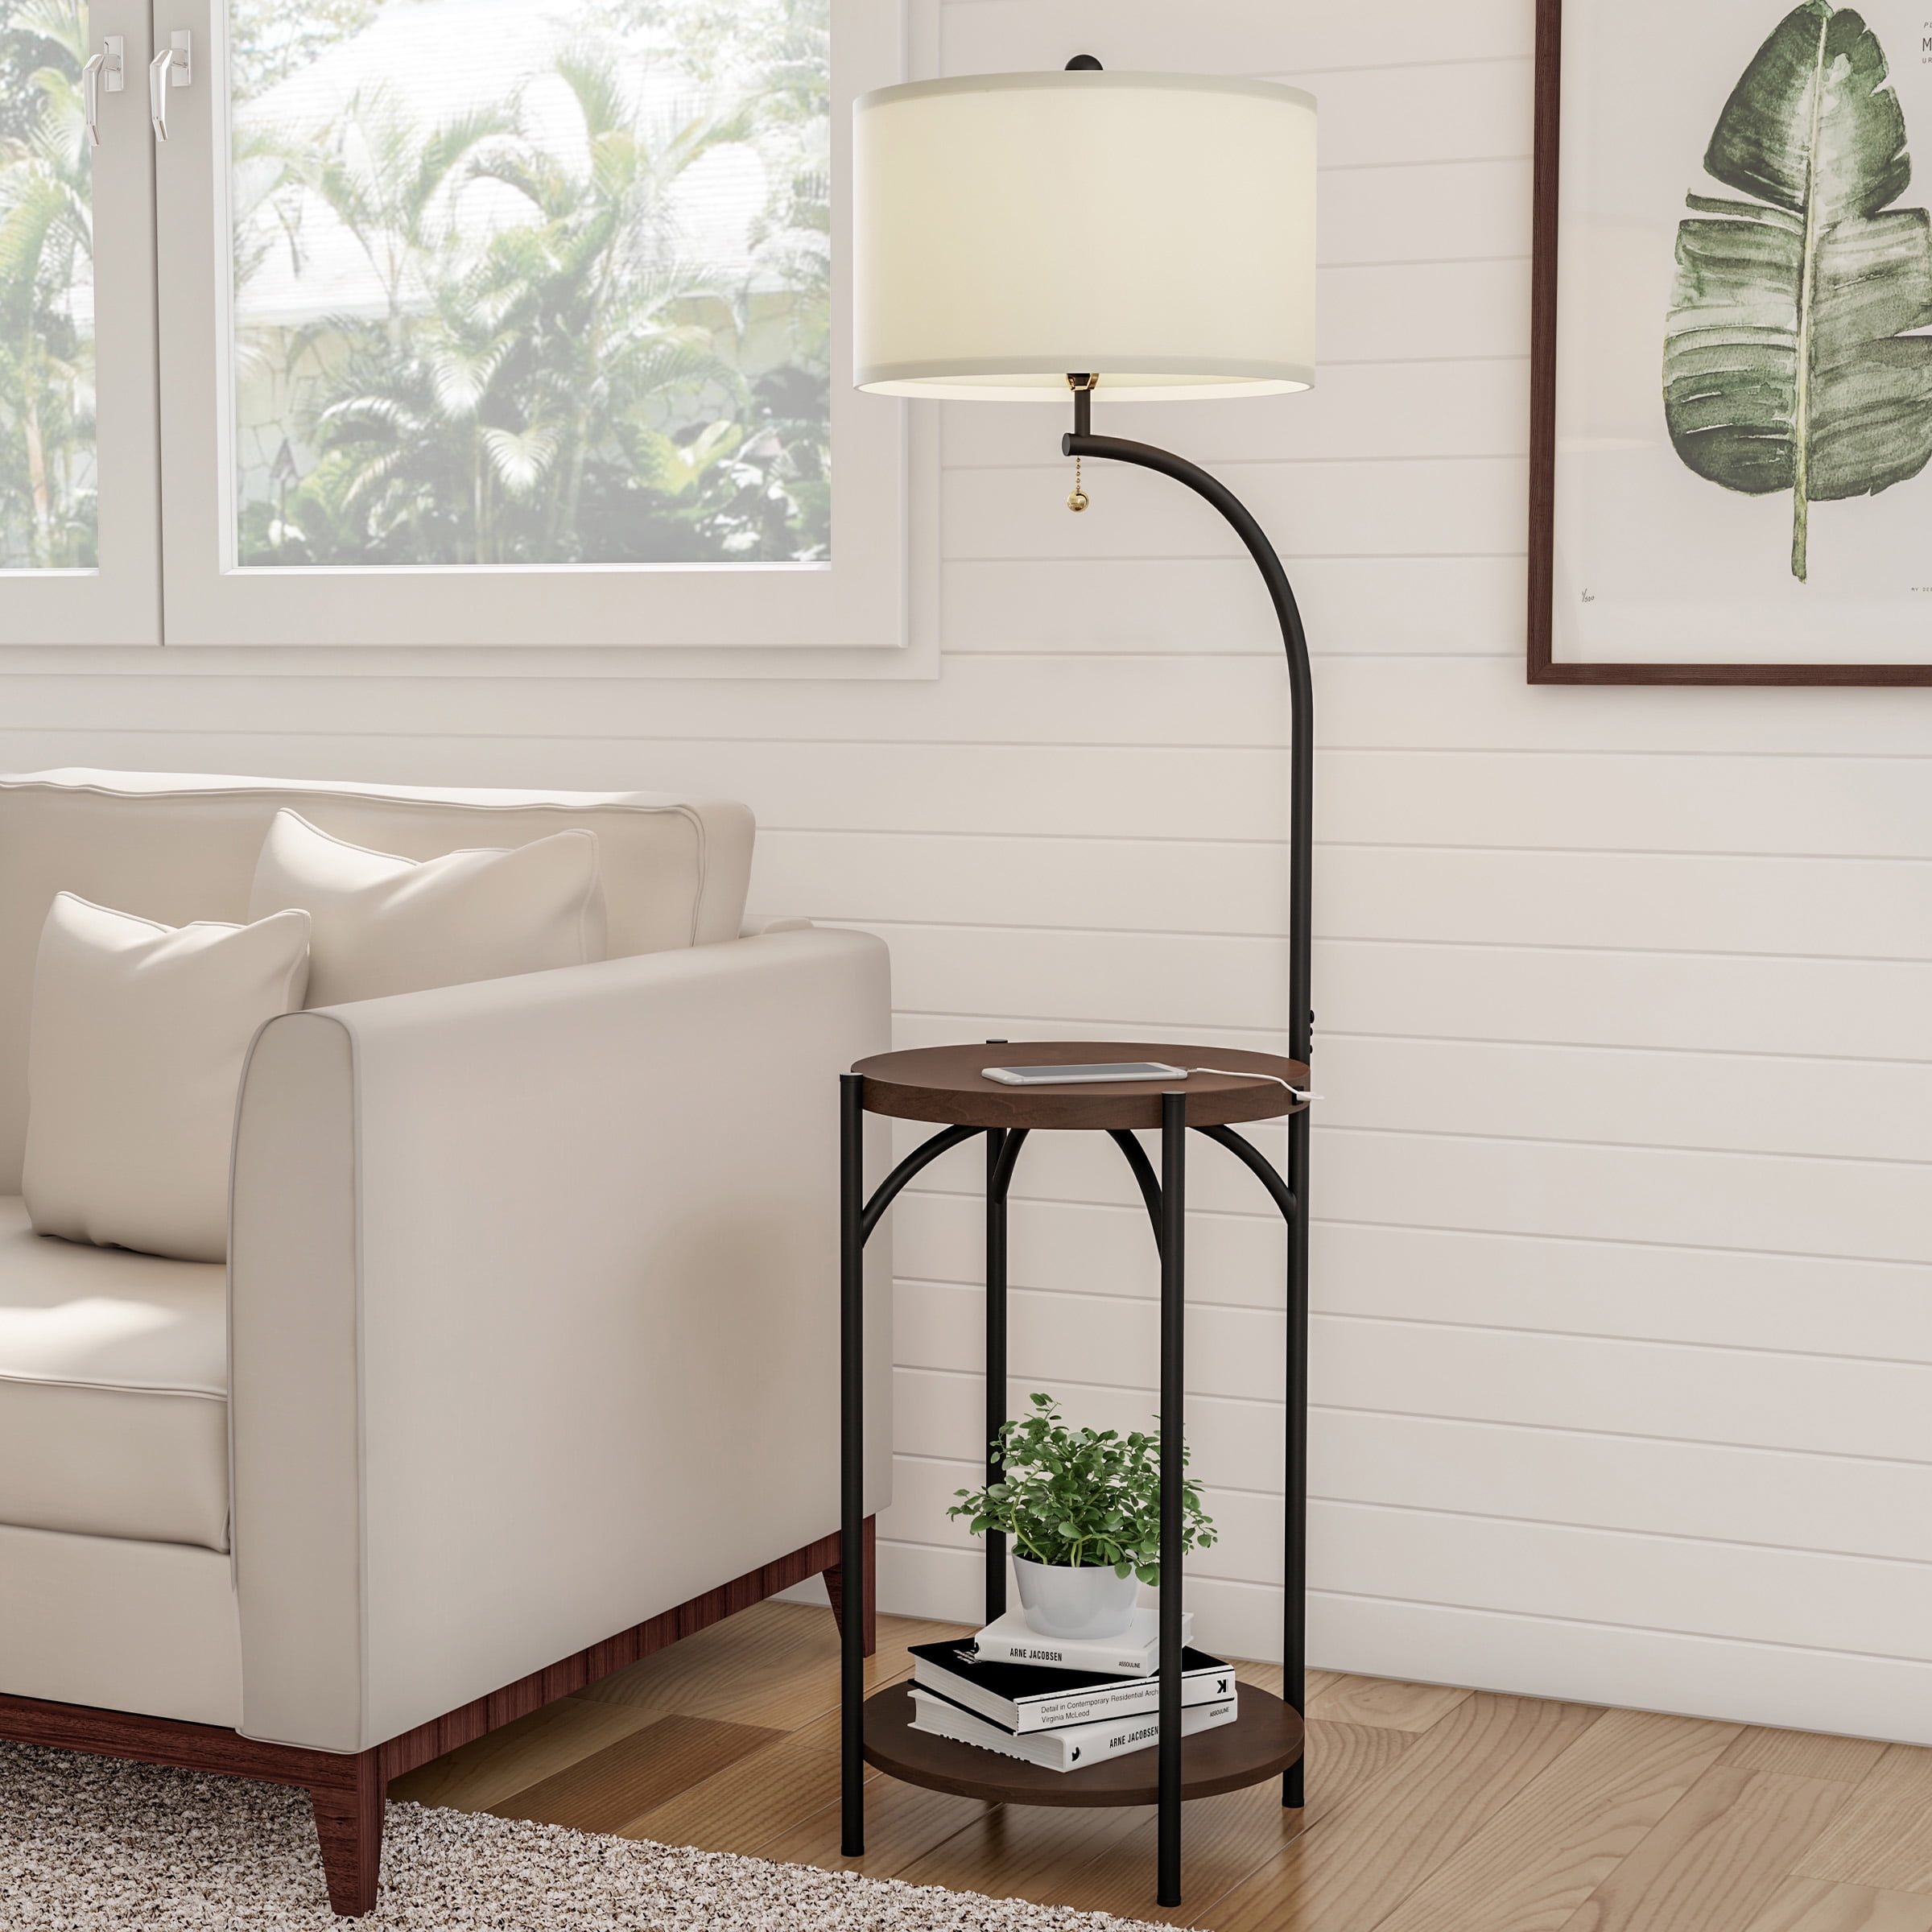 Floor with Table – Modern Rustic Side Table USB Charging Port, LED and Drum-Shaped Shade. Standing Light with Shelves by Lavish Home - Walmart.com